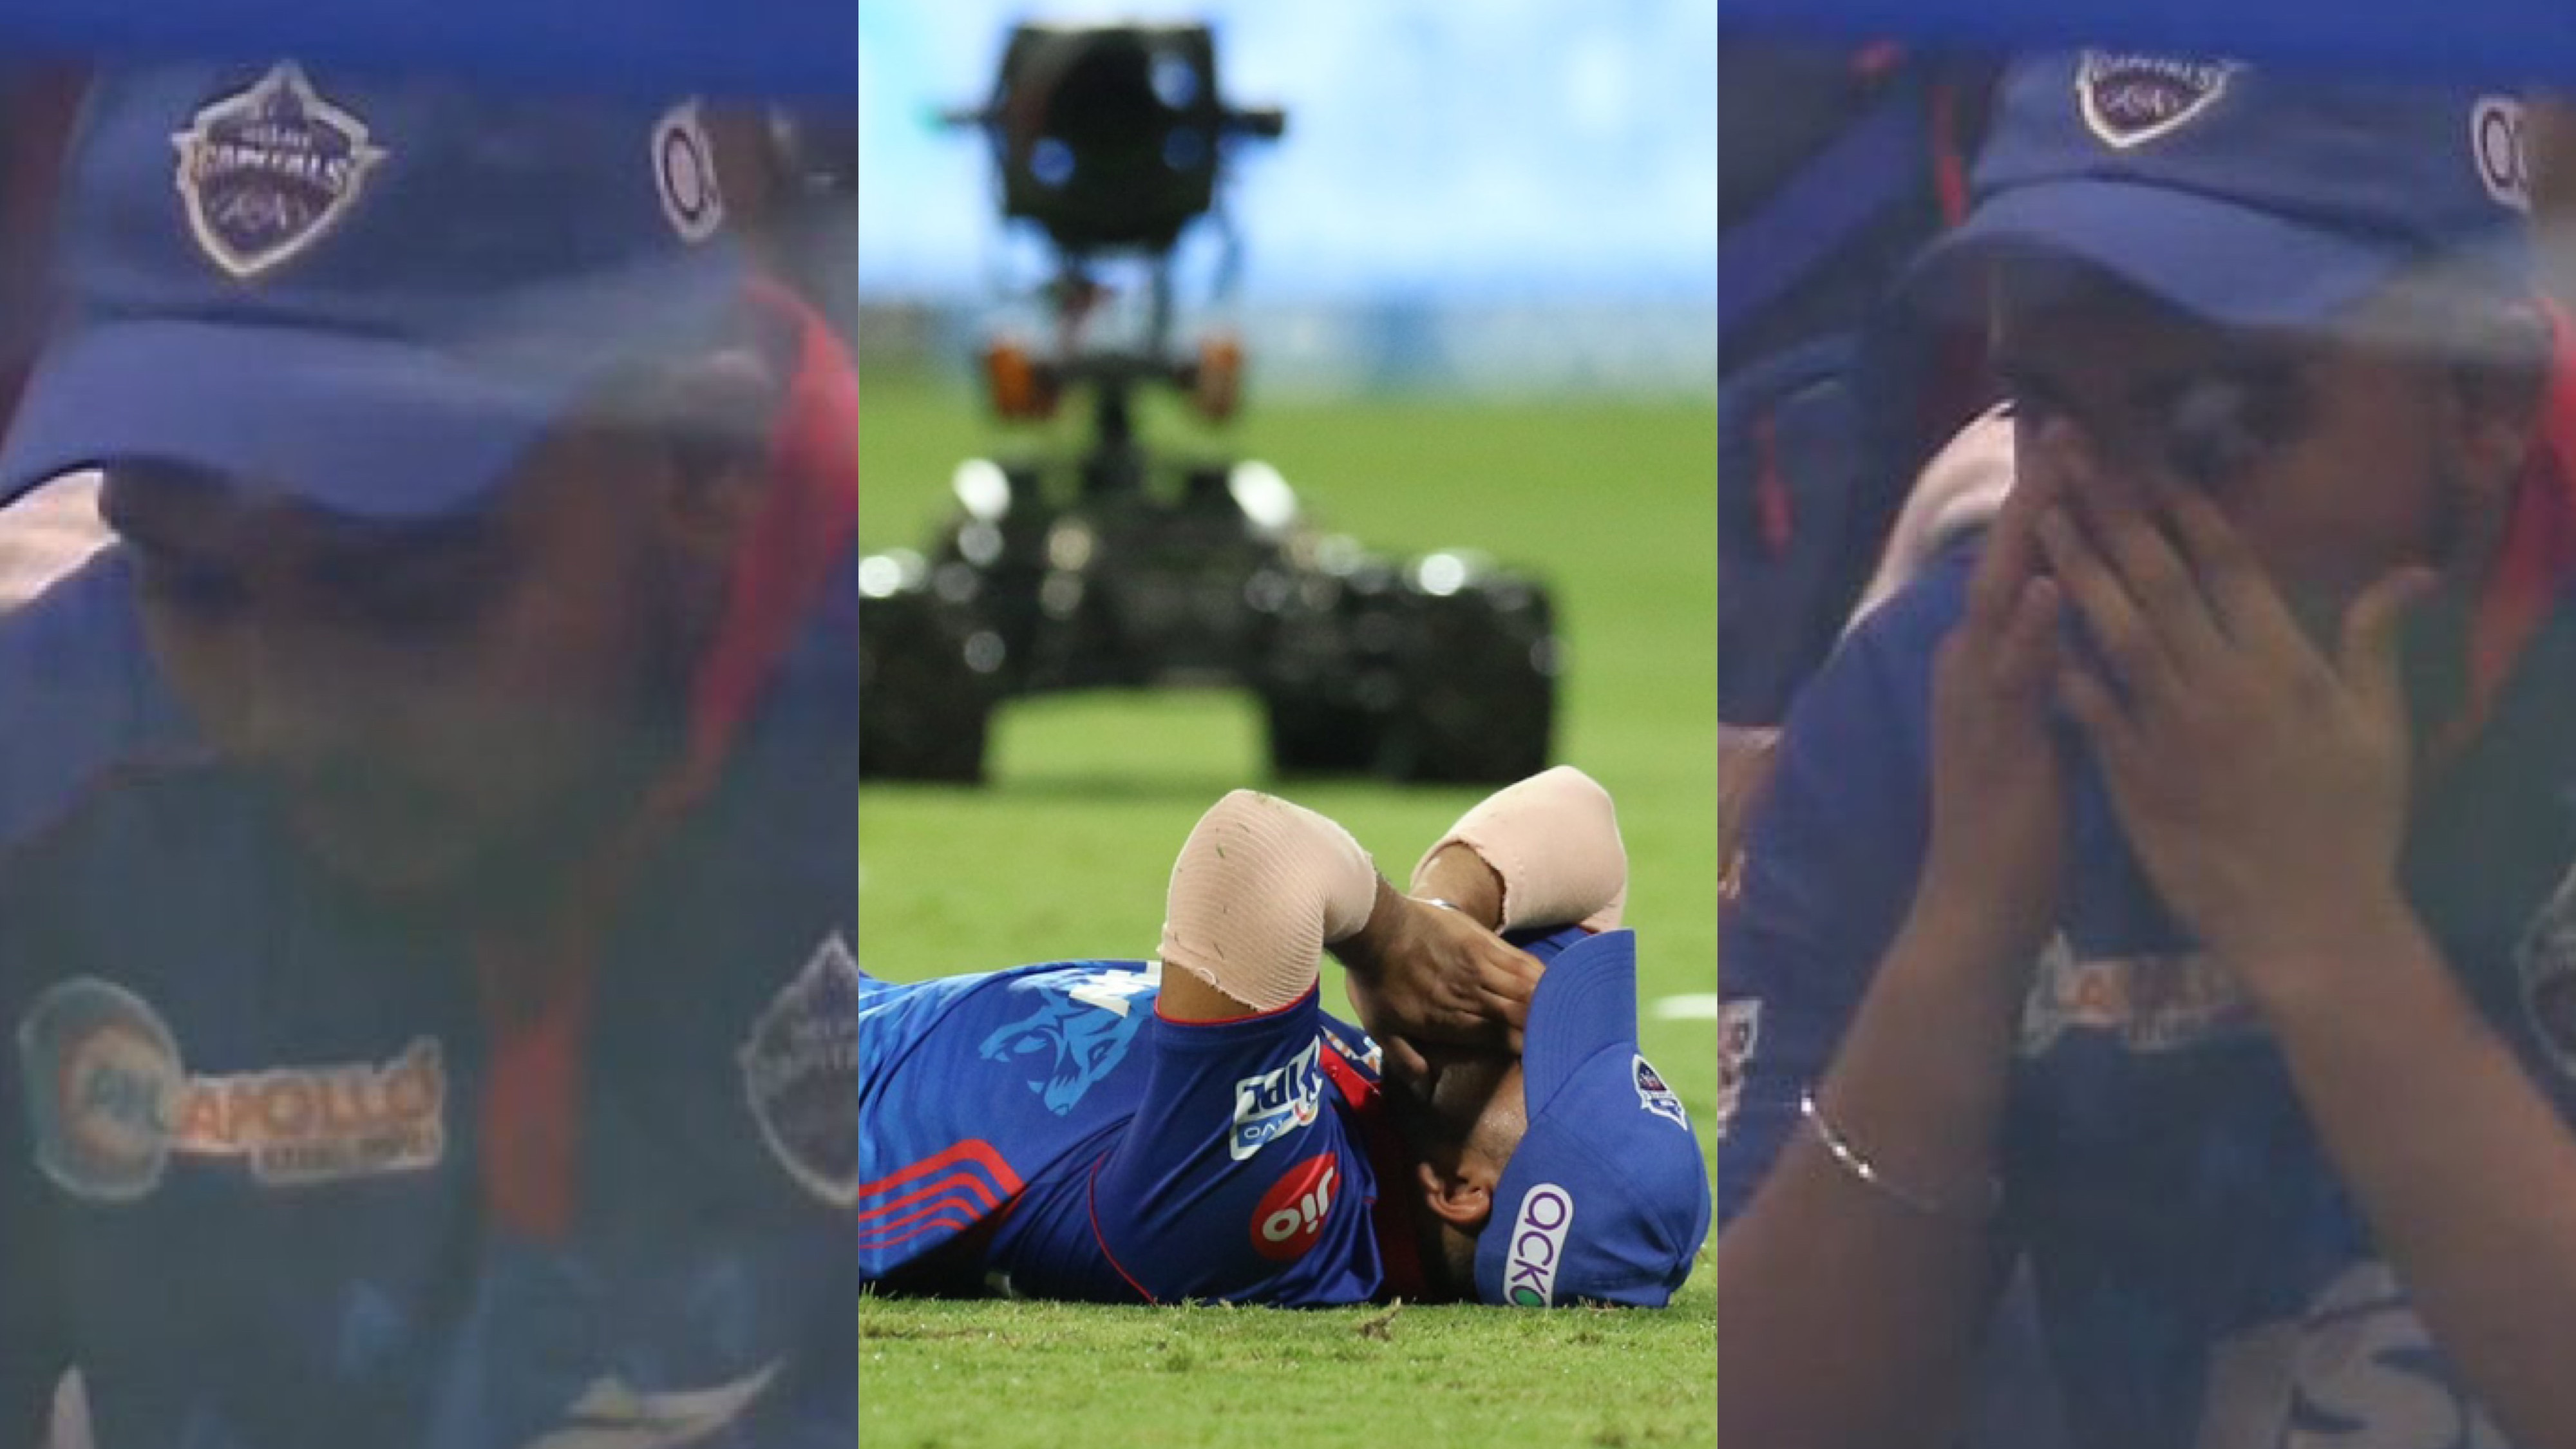 IPL 2021: WATCH - Prithvi Shaw breaks into tears after Delhi Capitals' loss to KKR in Qualifier 2